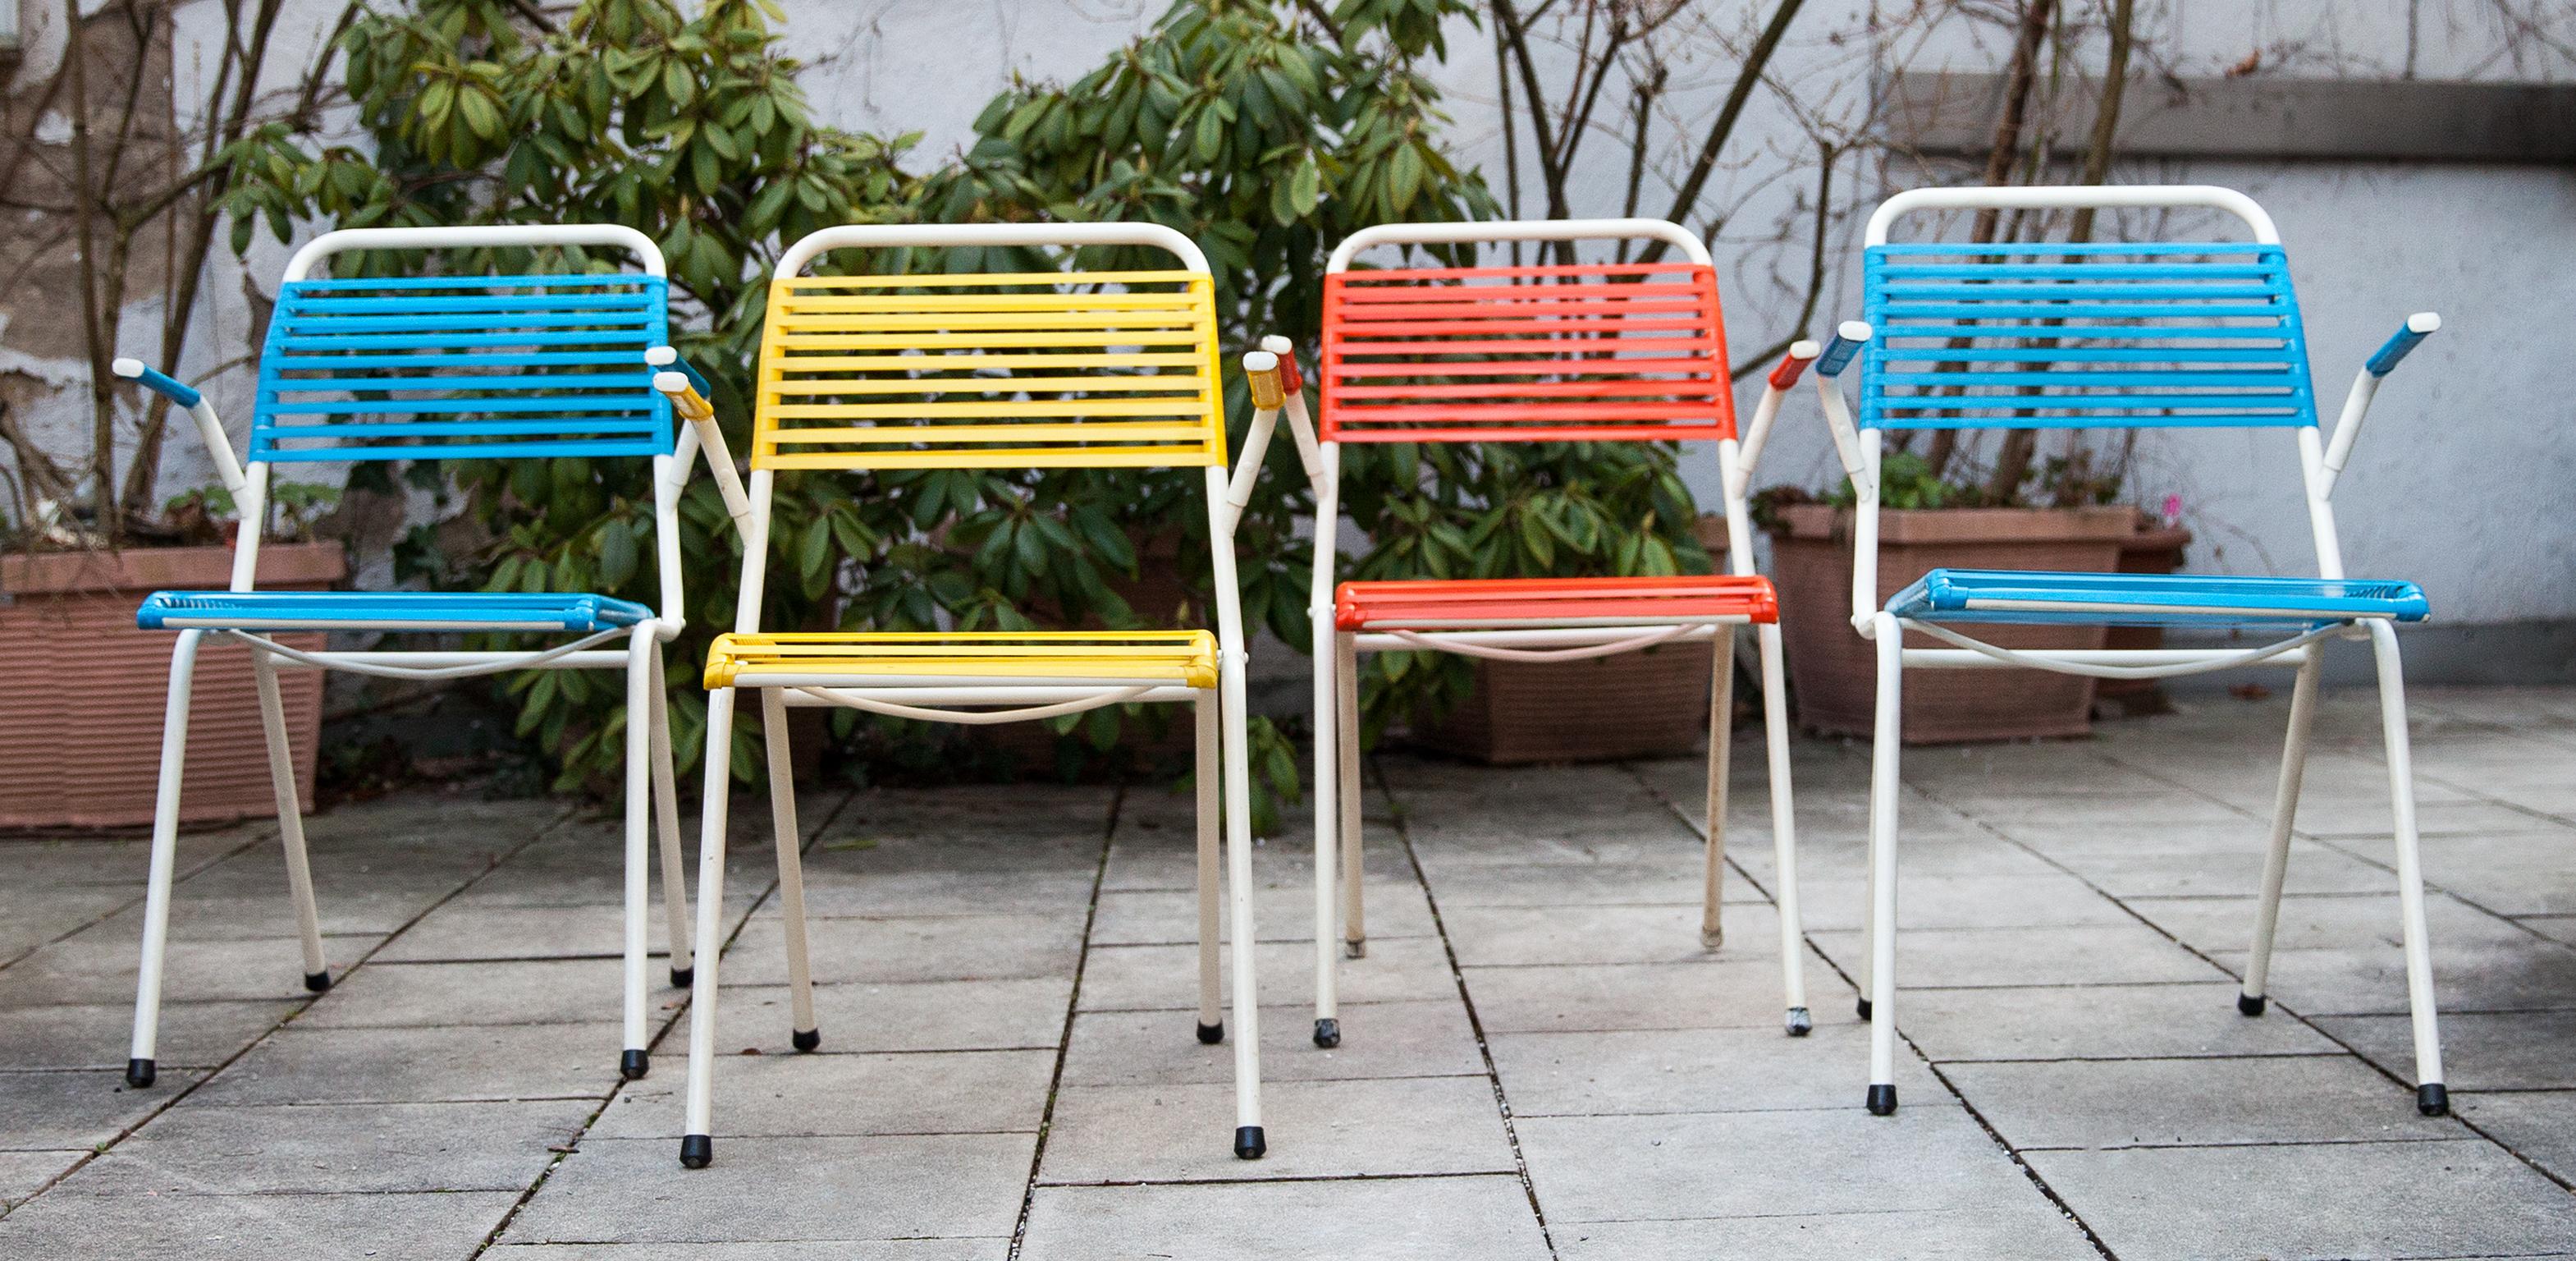 foldable garden chairs